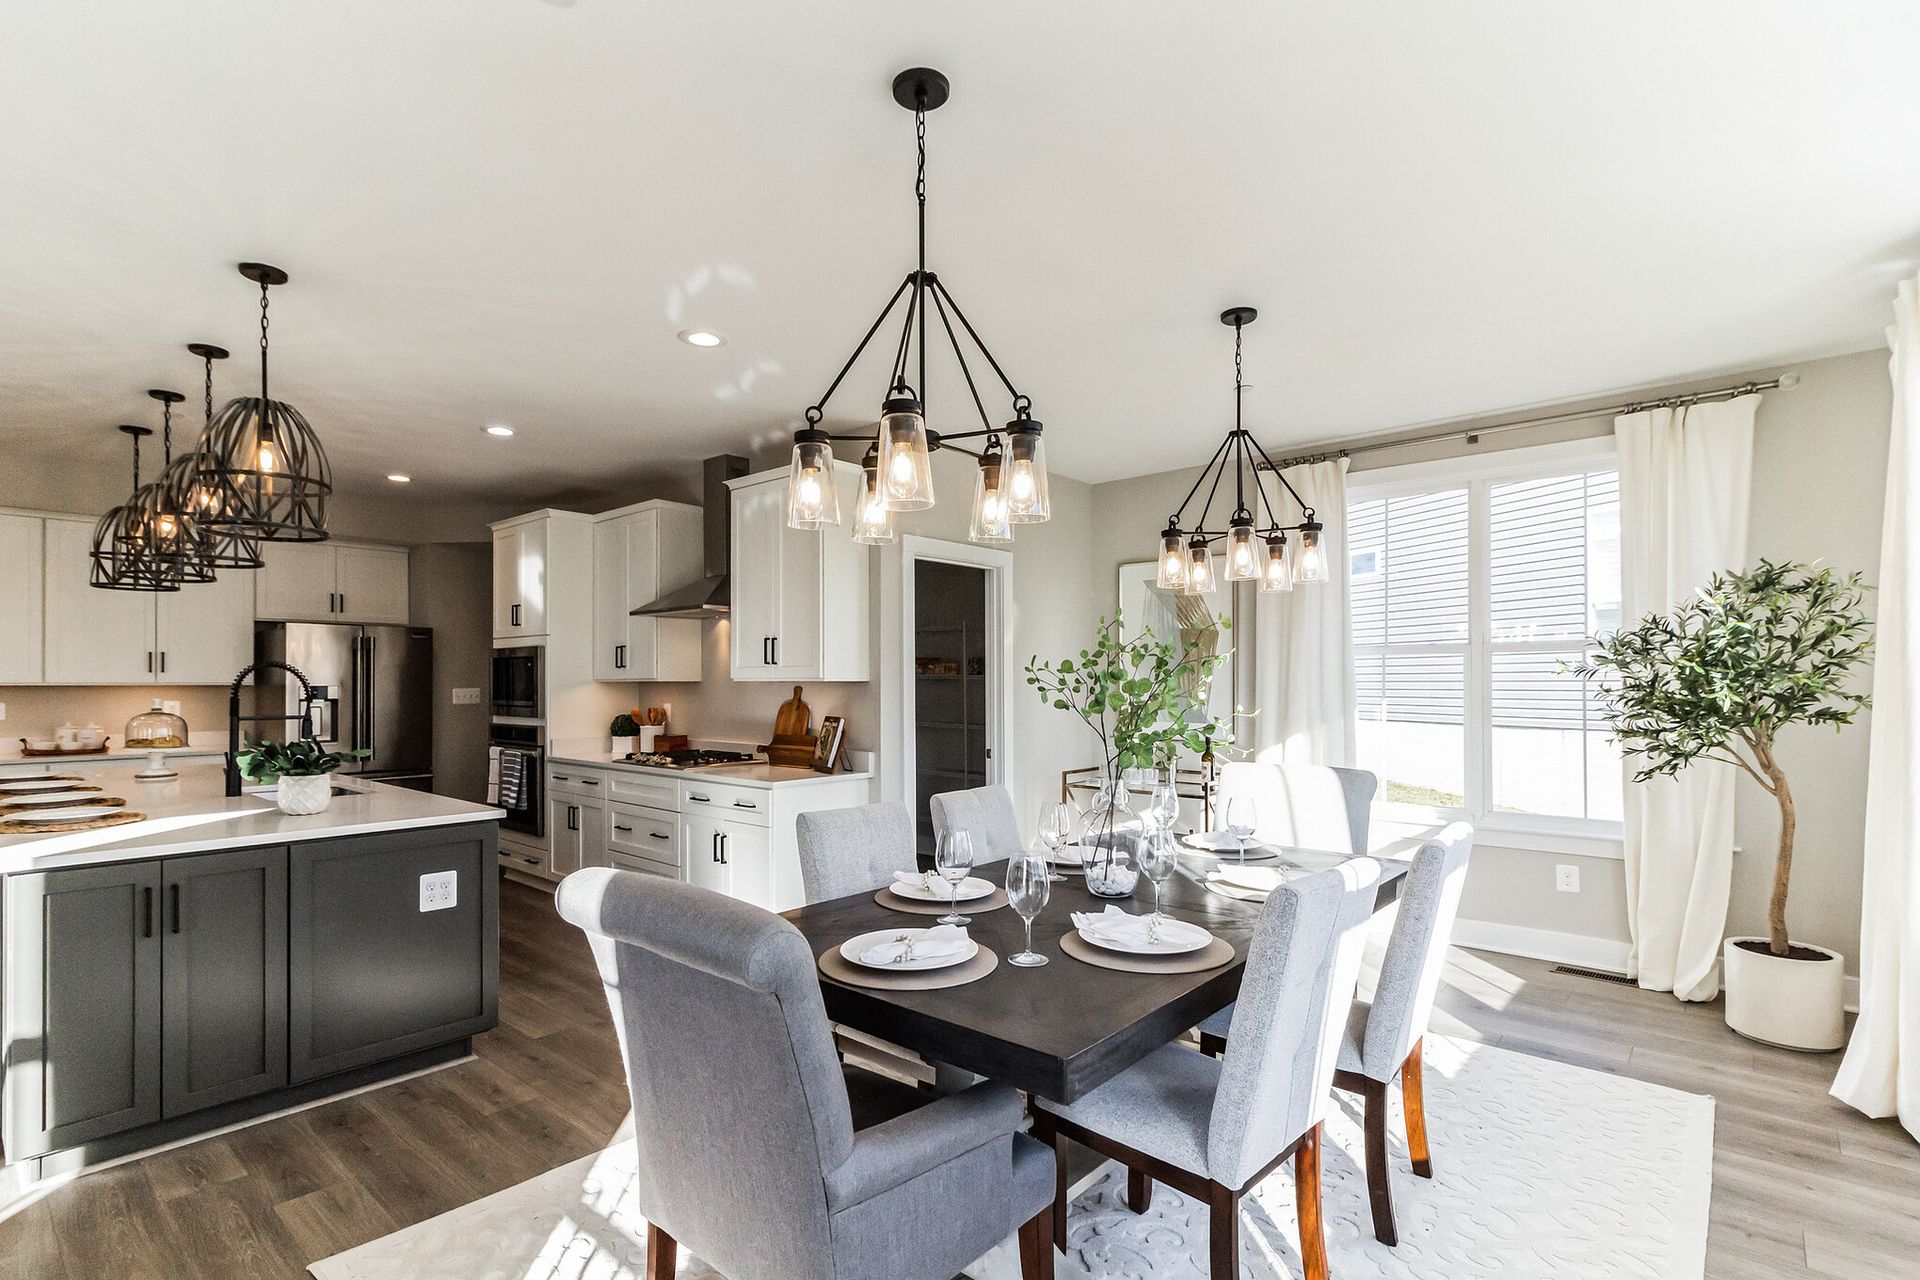 Kitchen looking into common space | Ward Communities | Edgewood, MD 21040